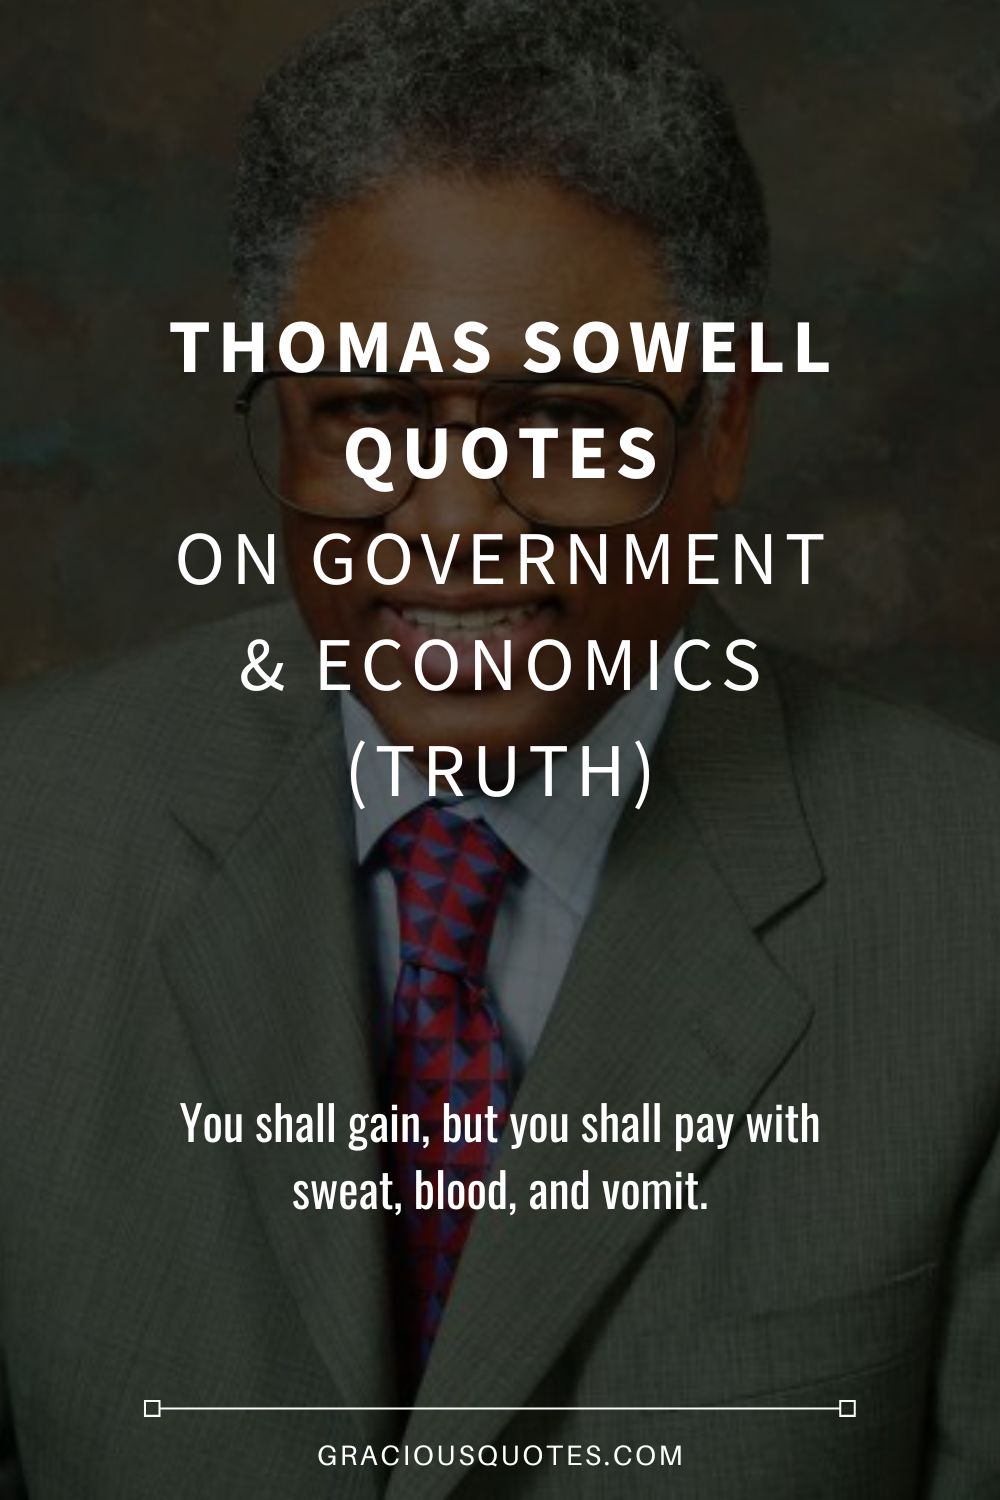 Thomas Sowell Quotes on Government & Economics (TRUTH) - Gracious Quotes